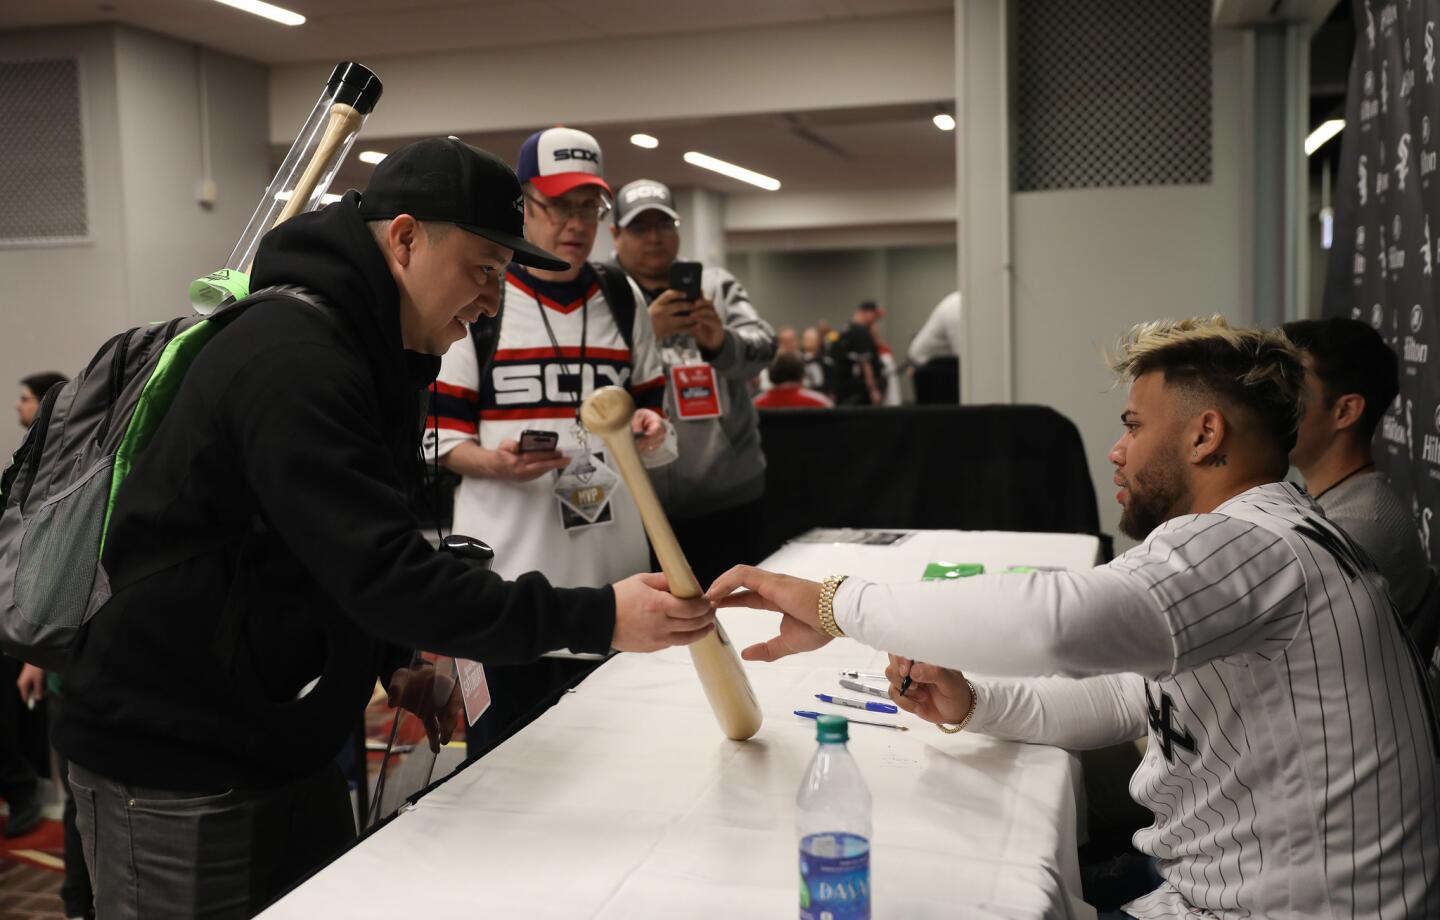 Fan Fernando Mendez gets his bat autographed by the White Sox's Yoan Moncada during SoxFest on Jan. 26, 2019, at the Hilton Chicago.